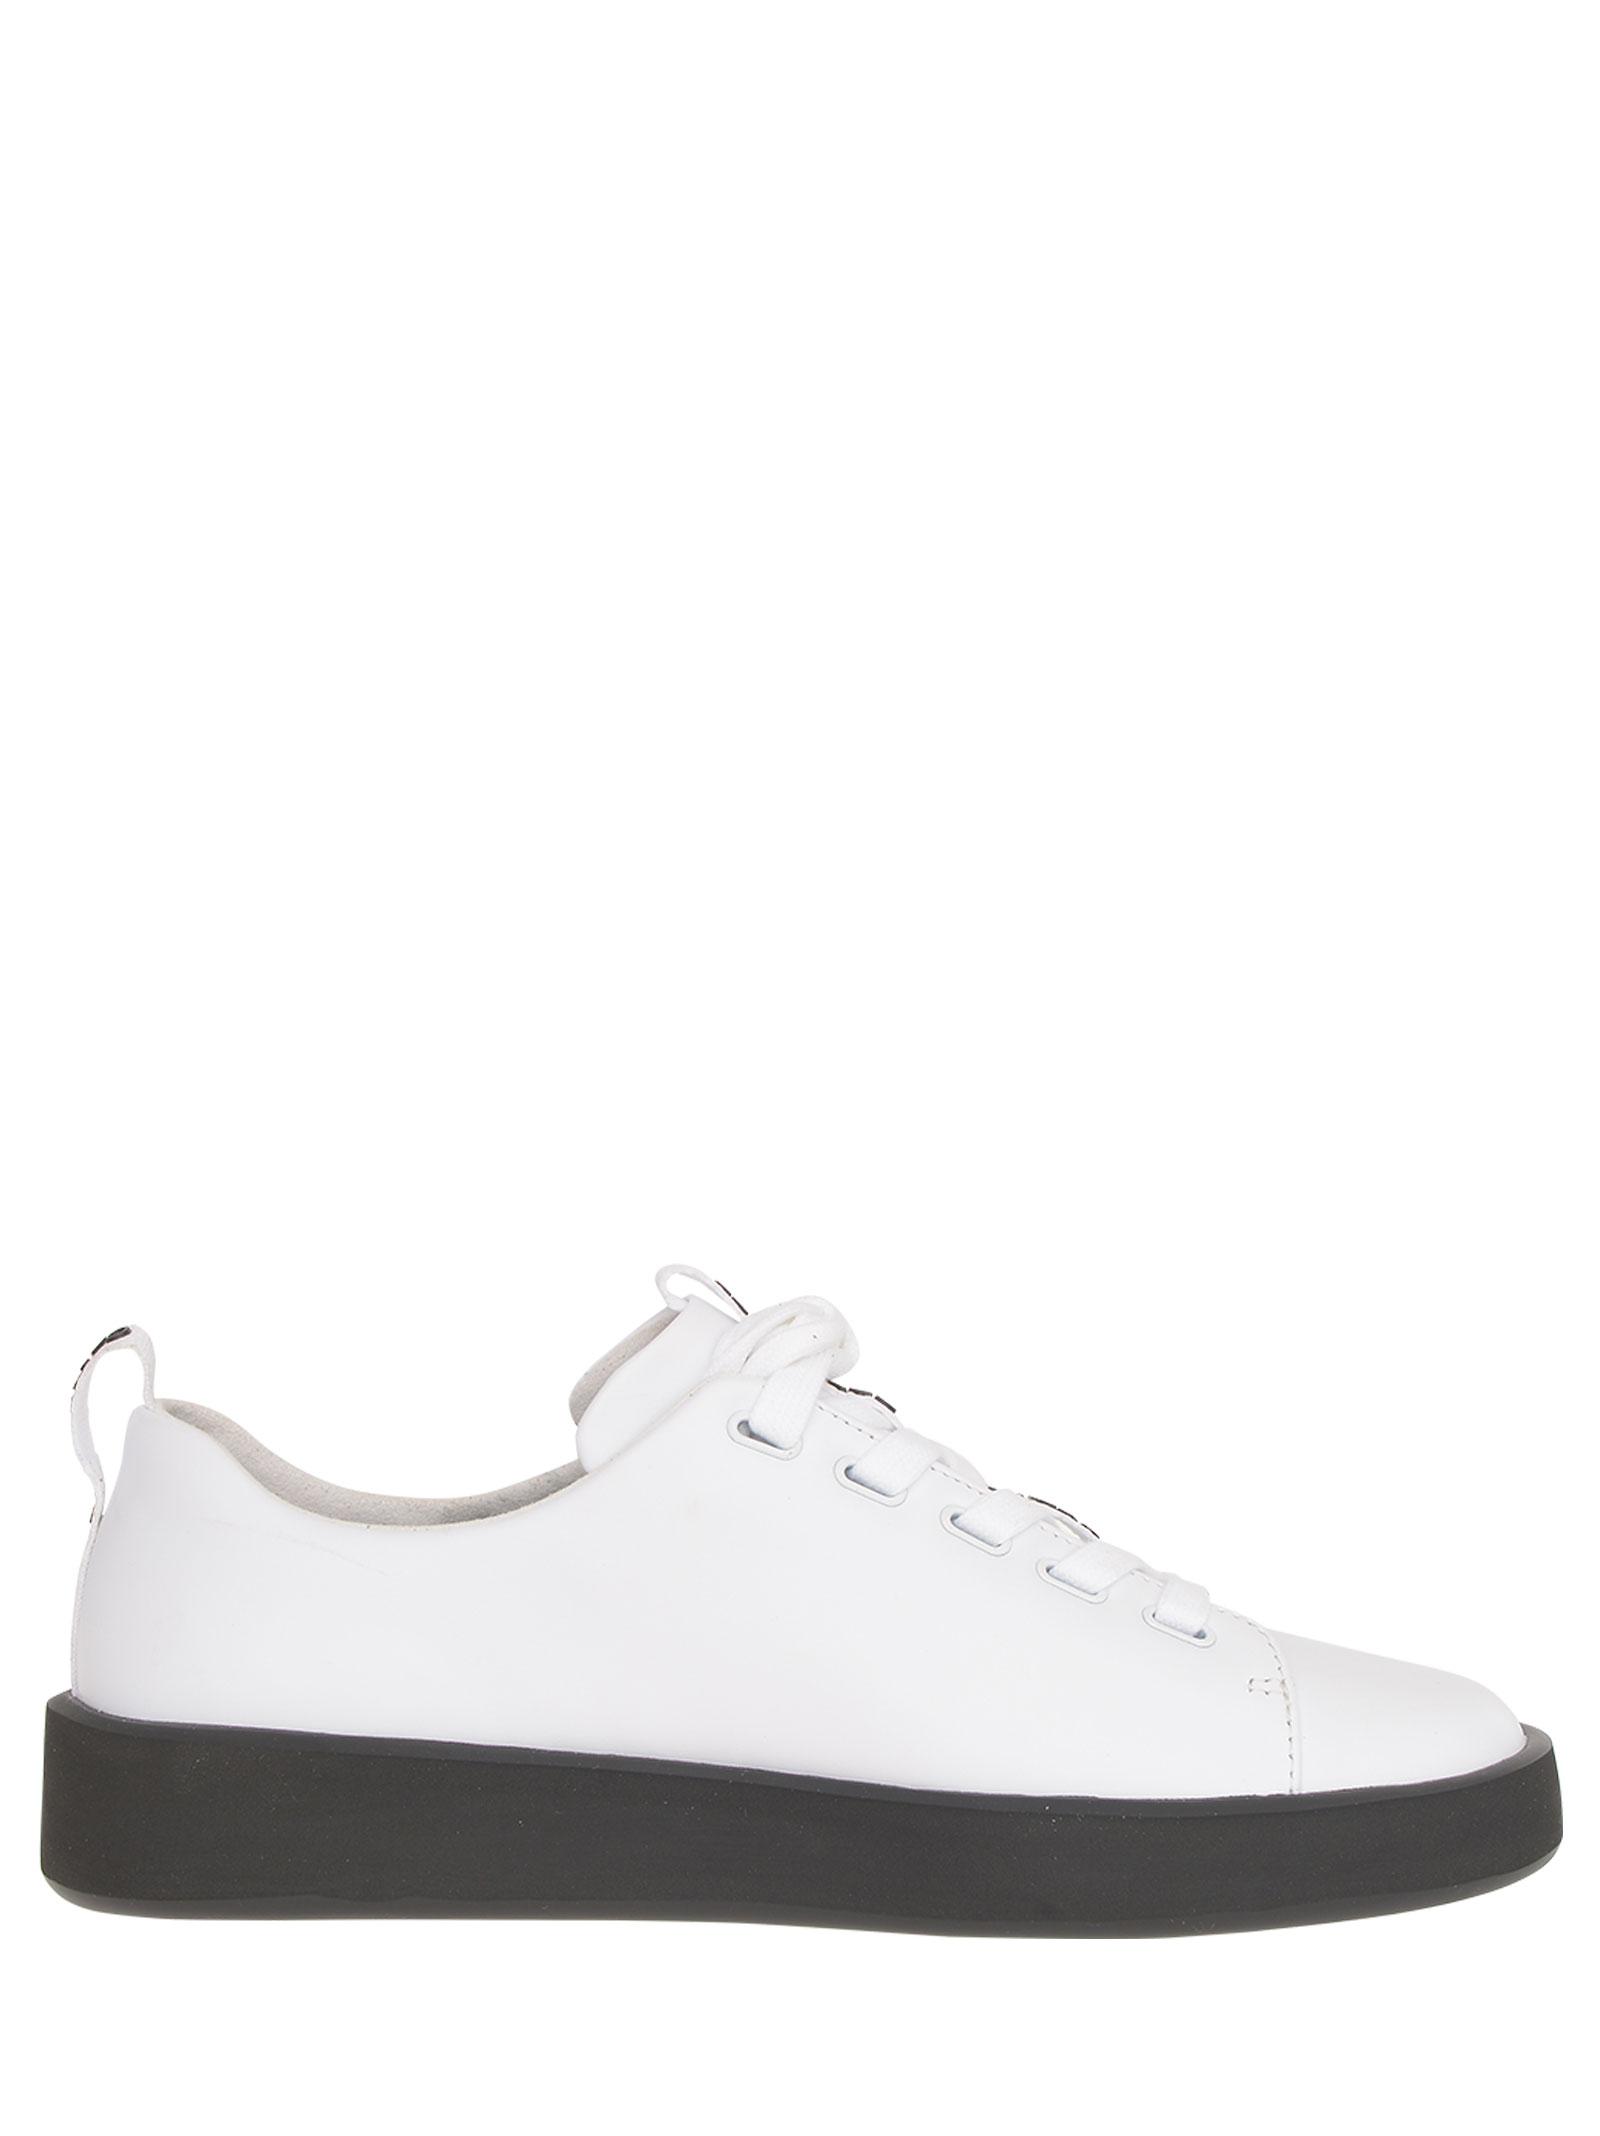 Camper Courb White Leather Sneakers With Black Sole And Strap With Embossed  Logo. for Men - Lyst